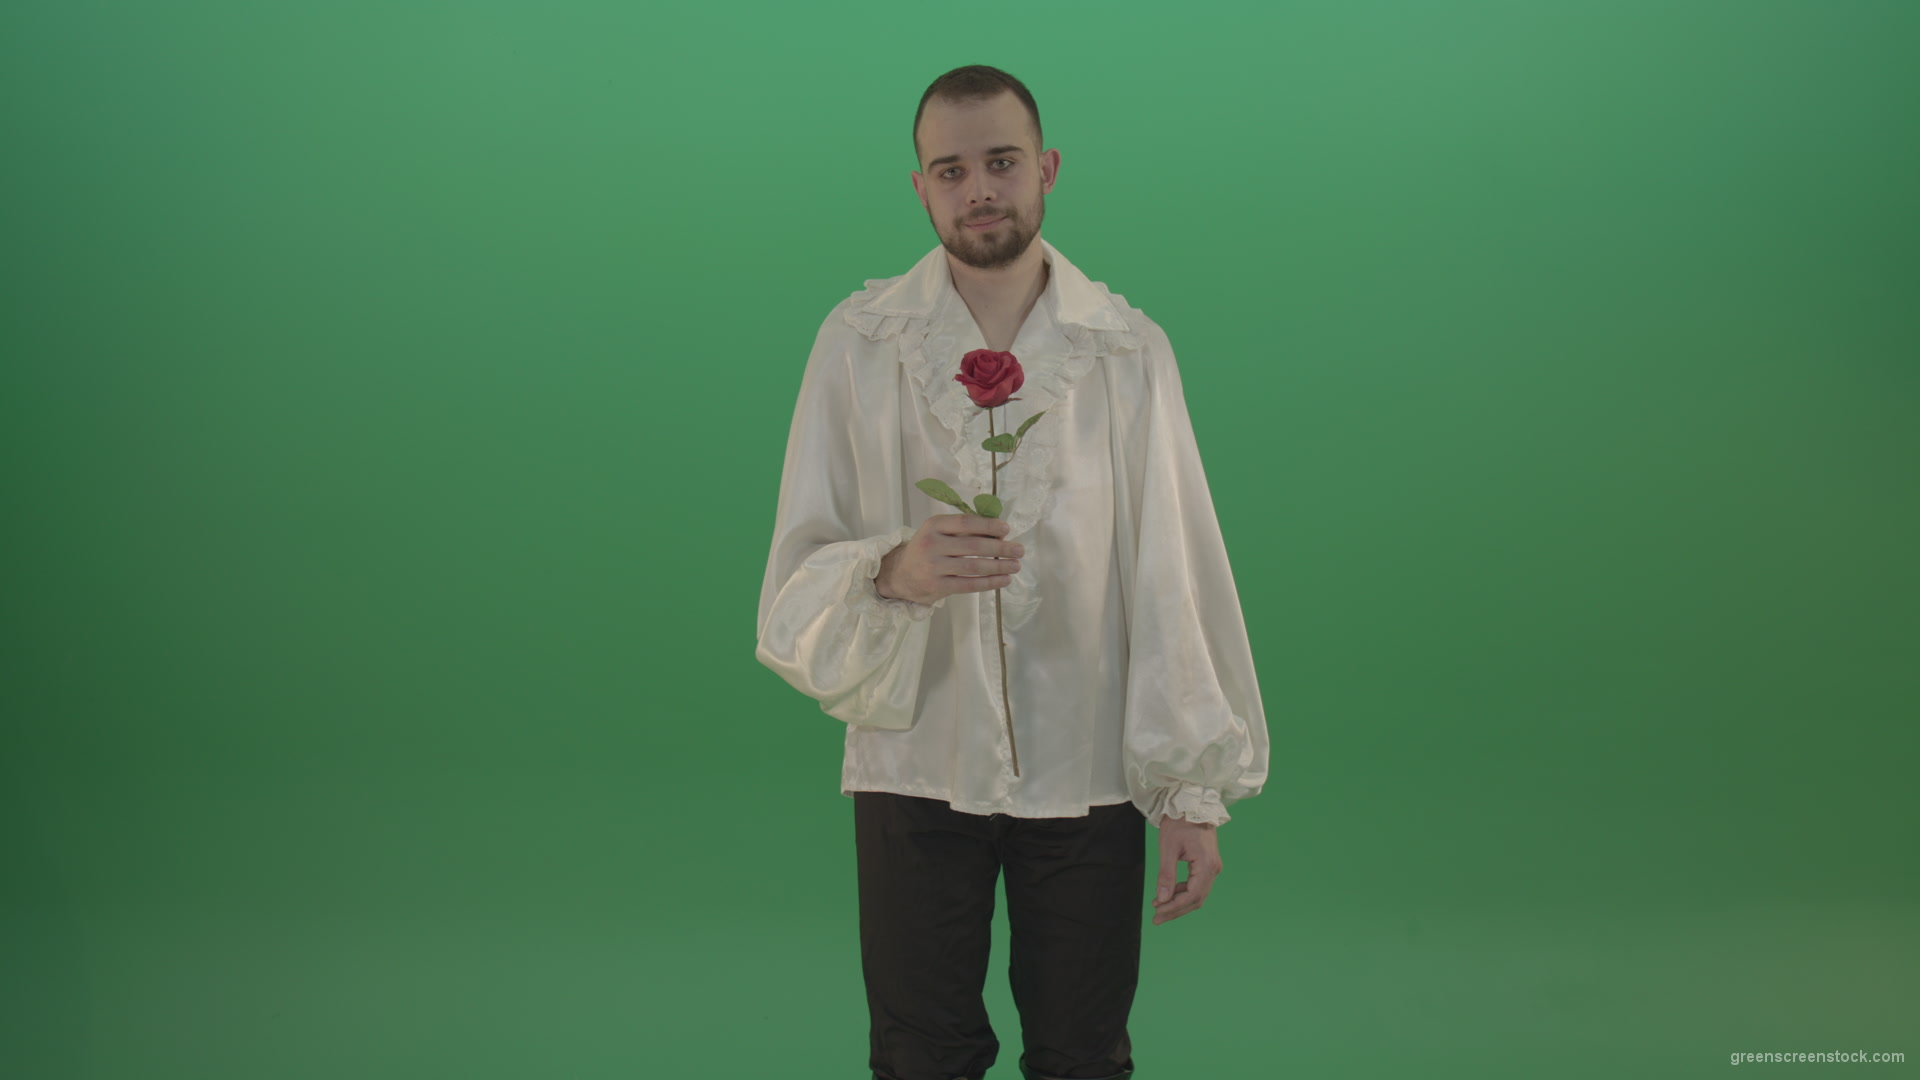 Glancing-at-the-red-flower-the-guy-gives-love-rose-to-camera-isolated-on-green-screen_001 Green Screen Stock